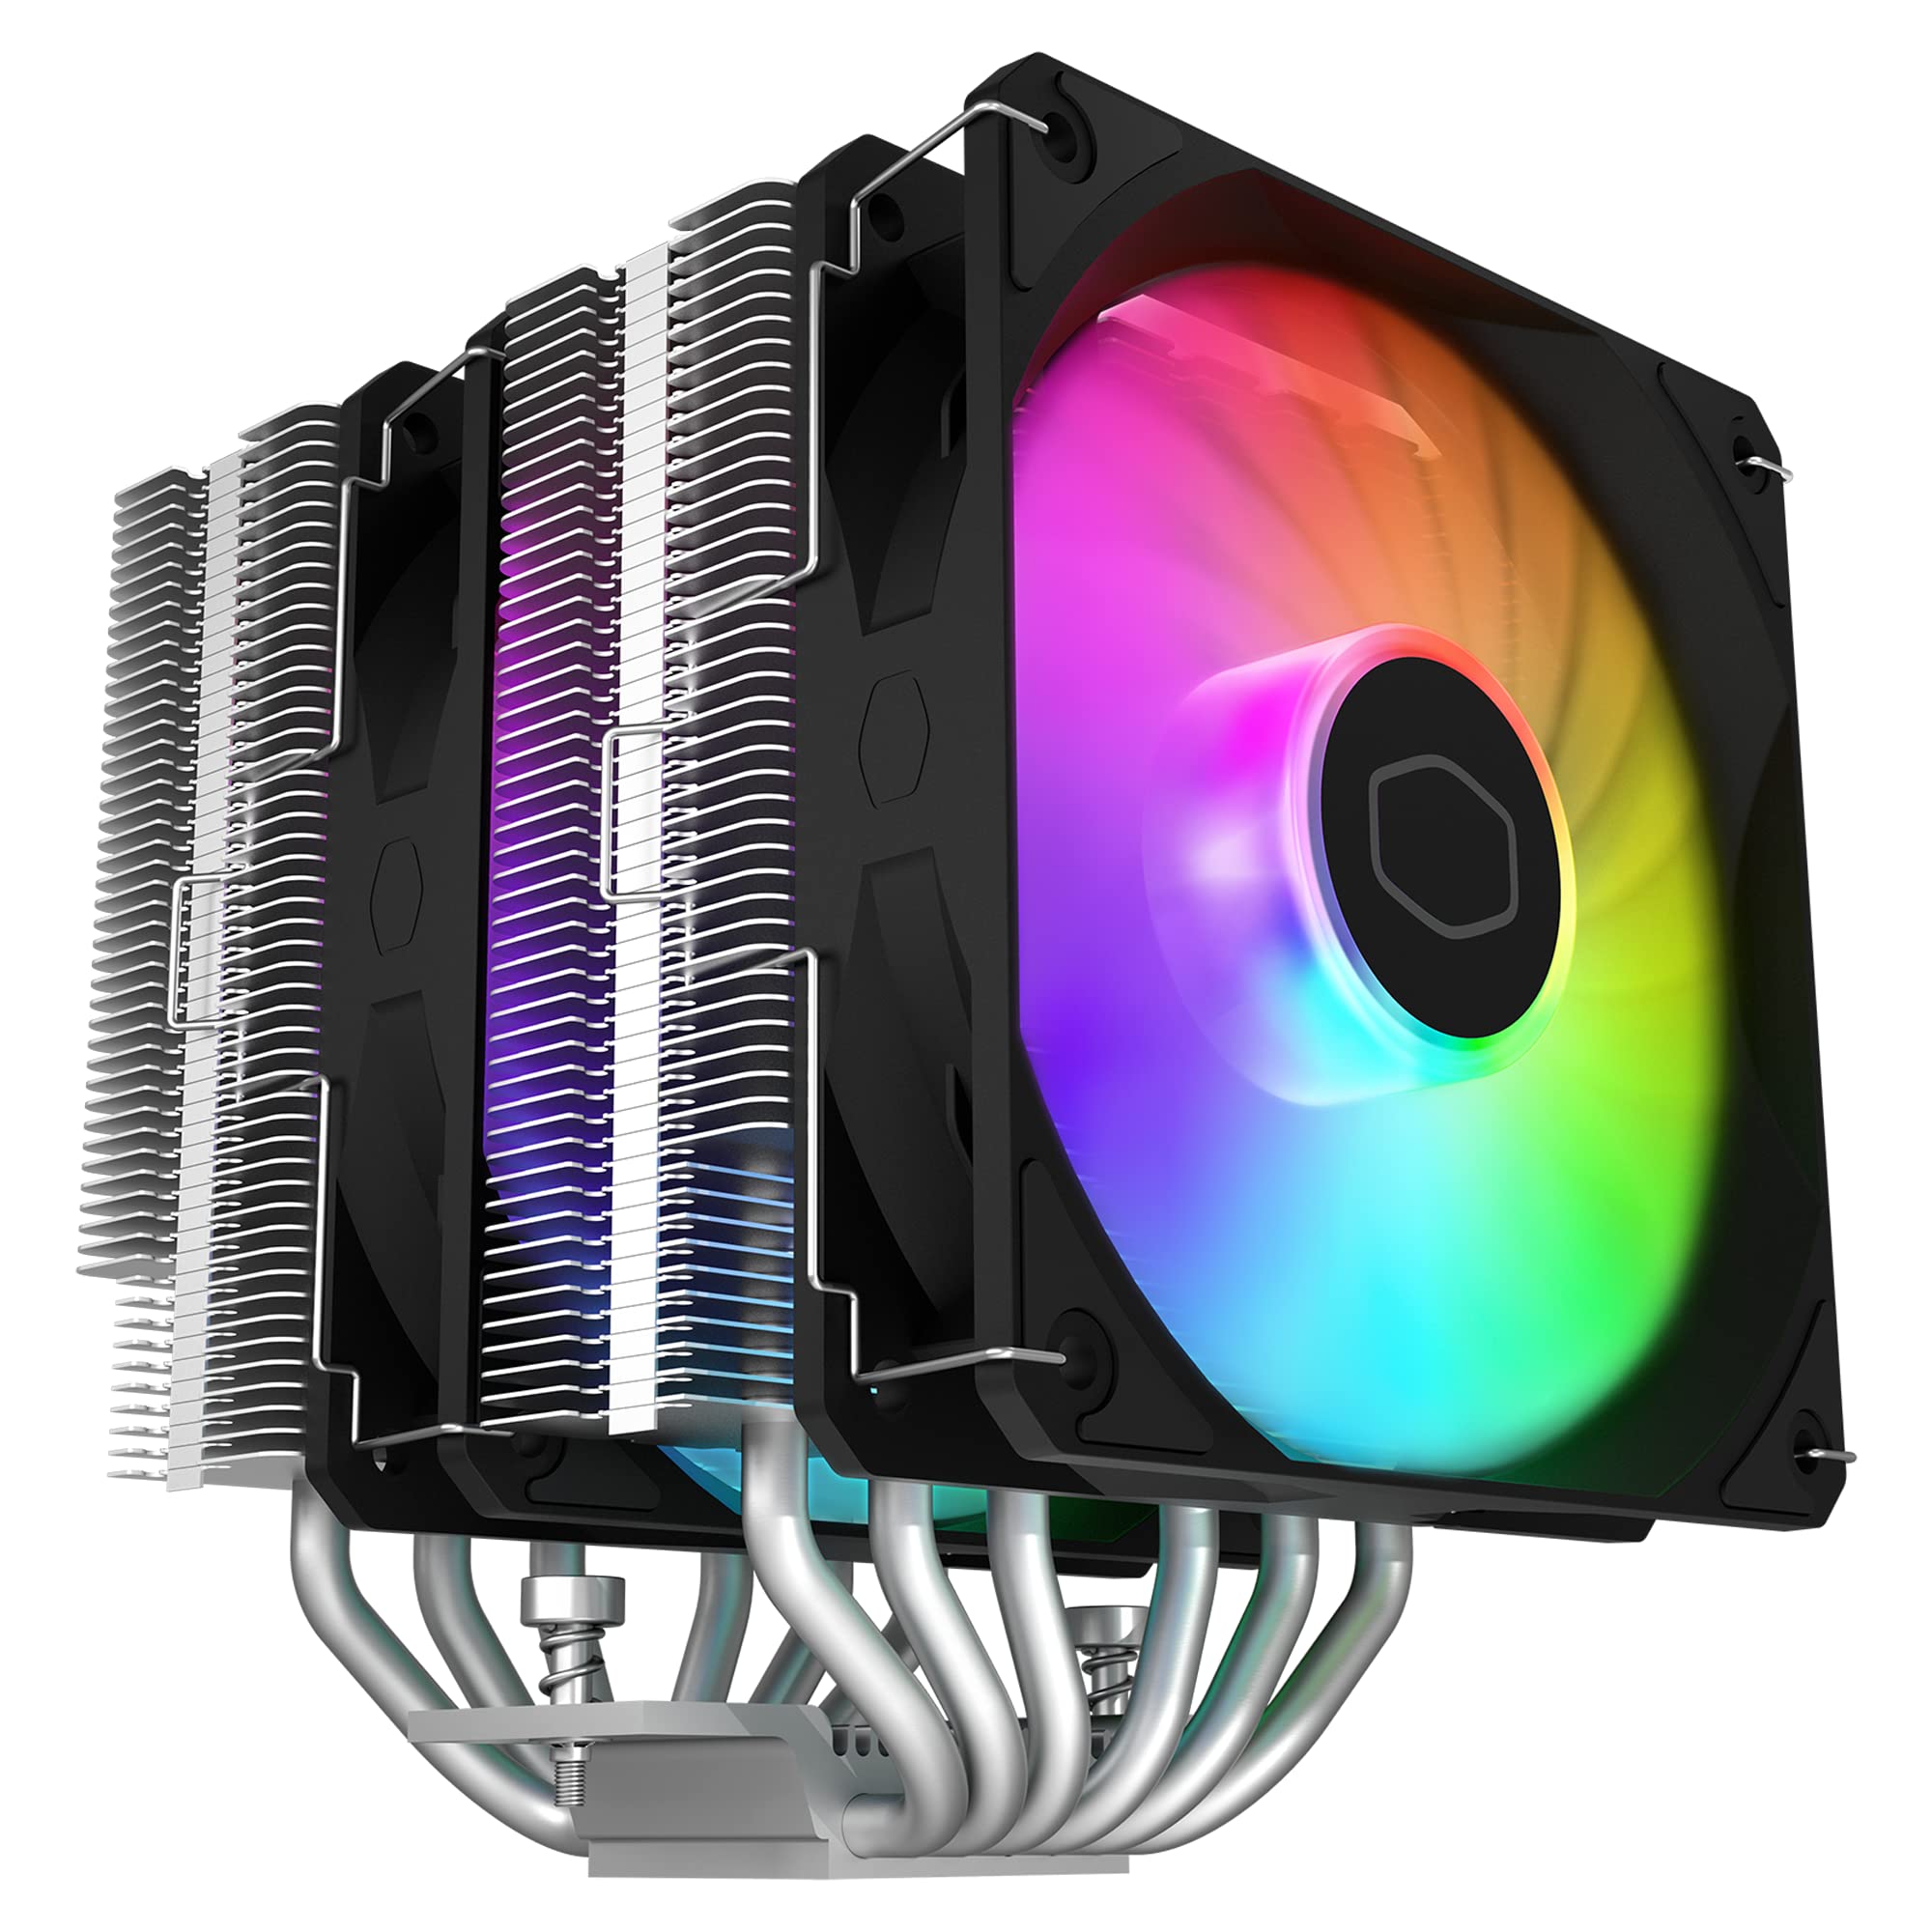 Cooler Master Hyper 620S Dual Tower CPU Air Cooler $34.99 + Free Shipping